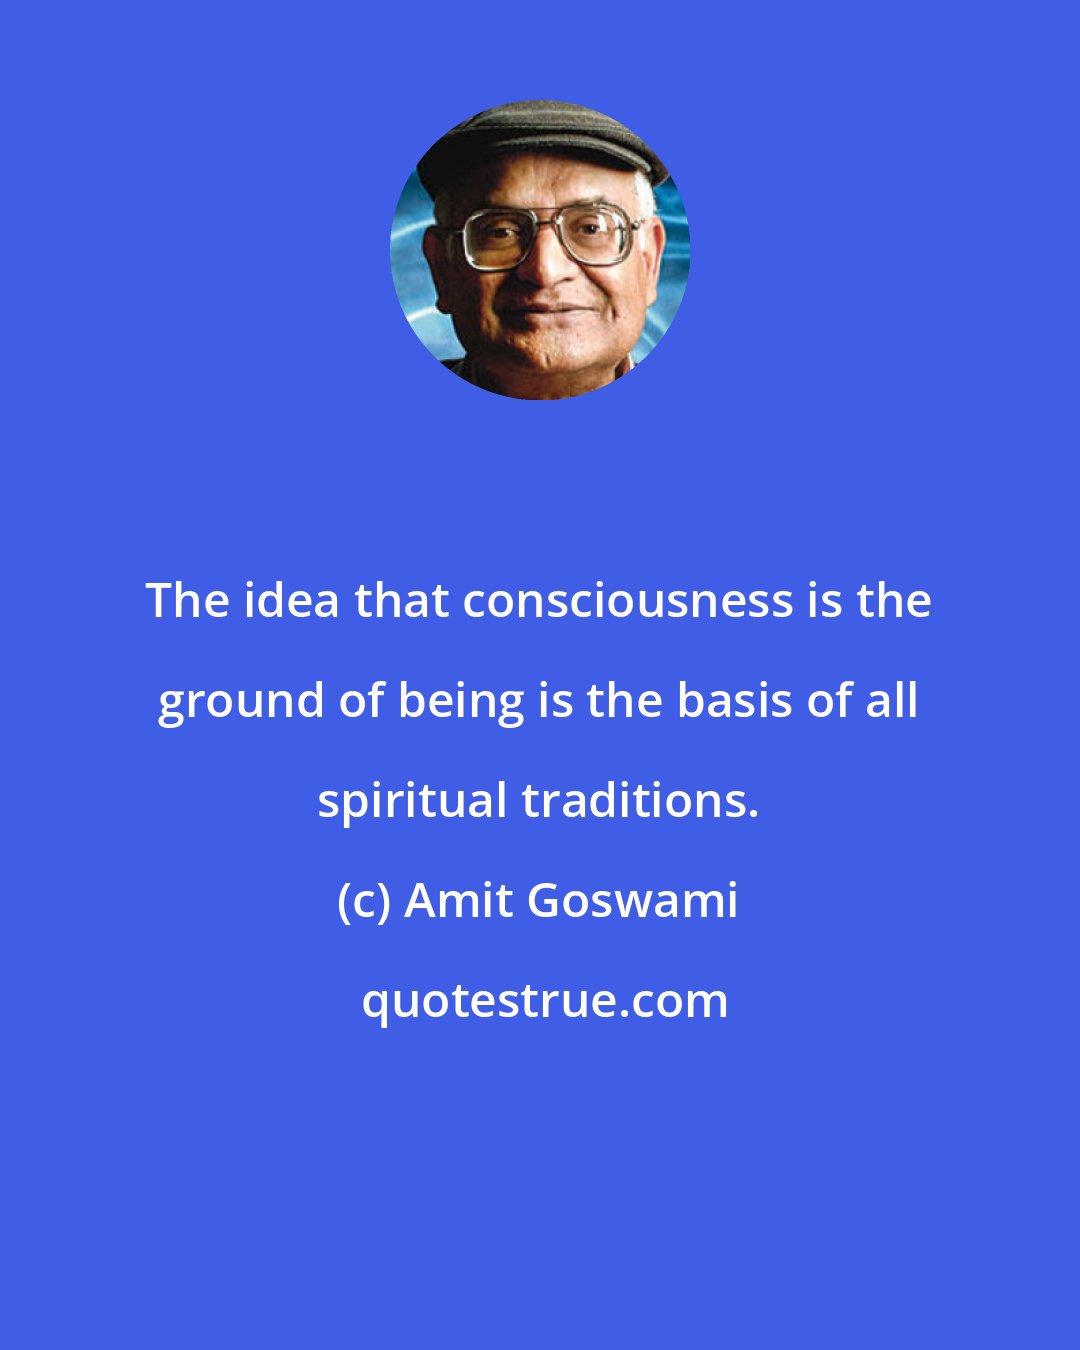 Amit Goswami: The idea that consciousness is the ground of being is the basis of all spiritual traditions.